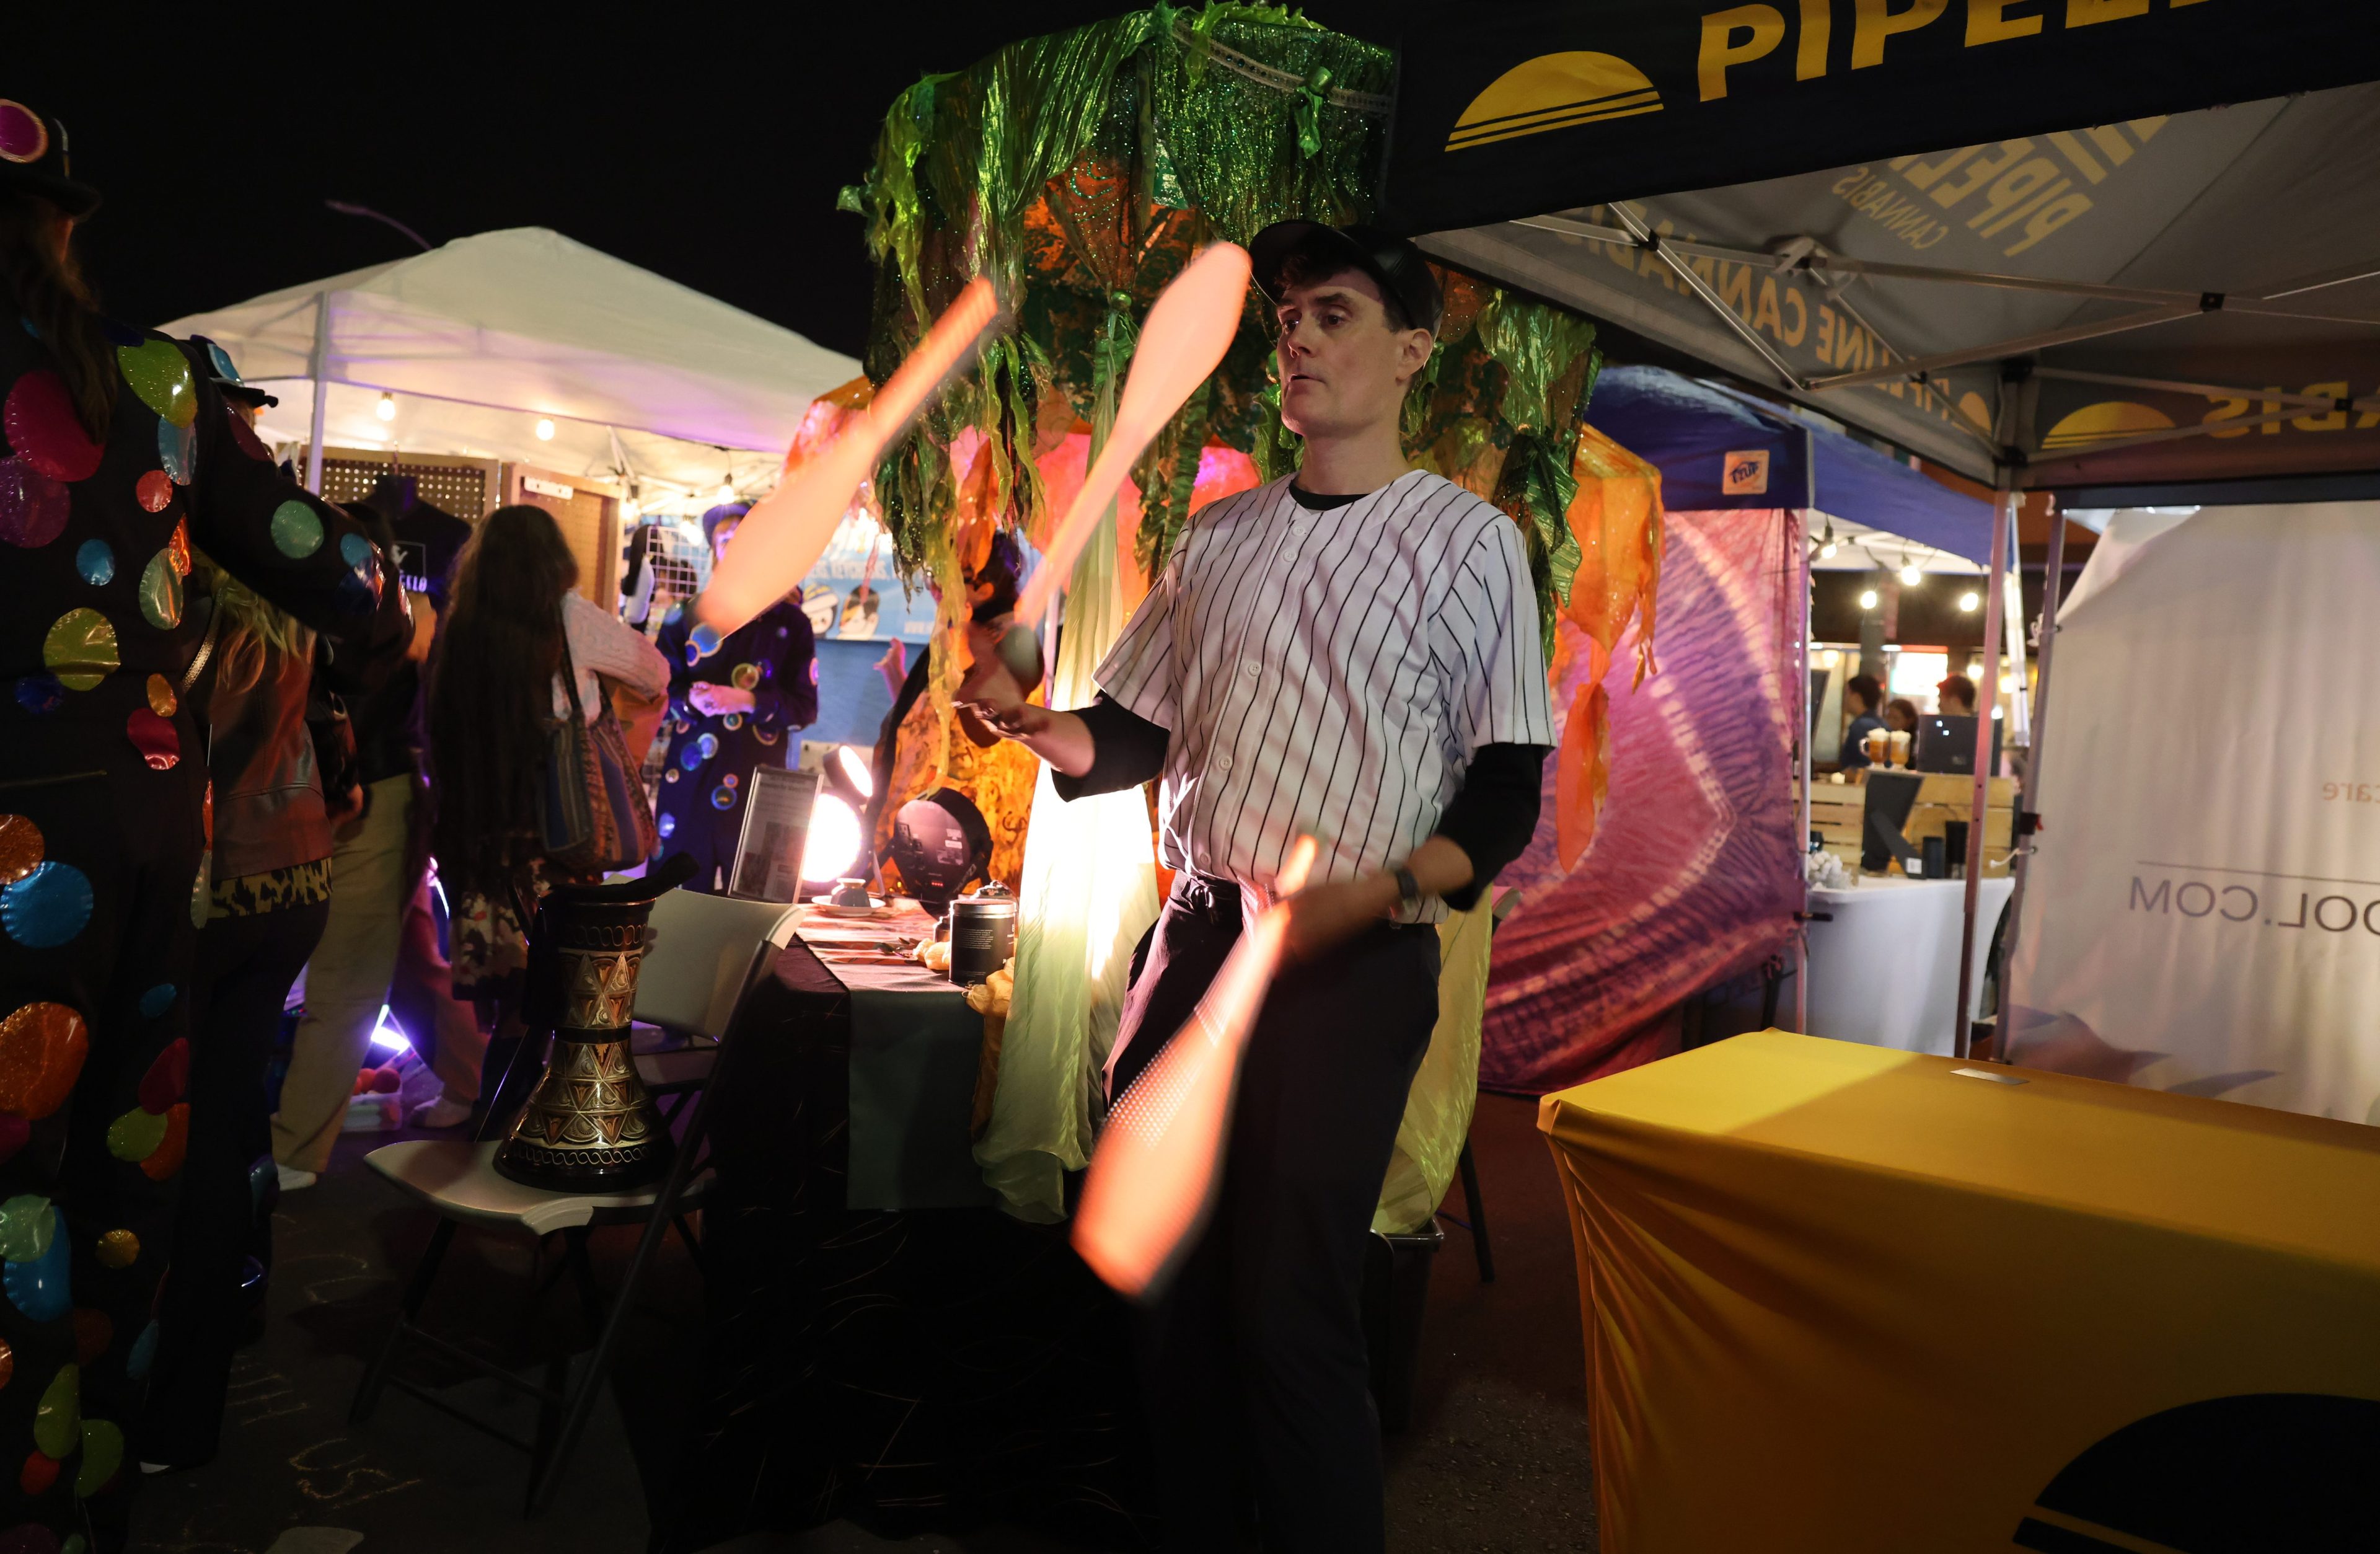 A person juggles clubs at a vibrant outdoor market with colorful tents and festive attire.